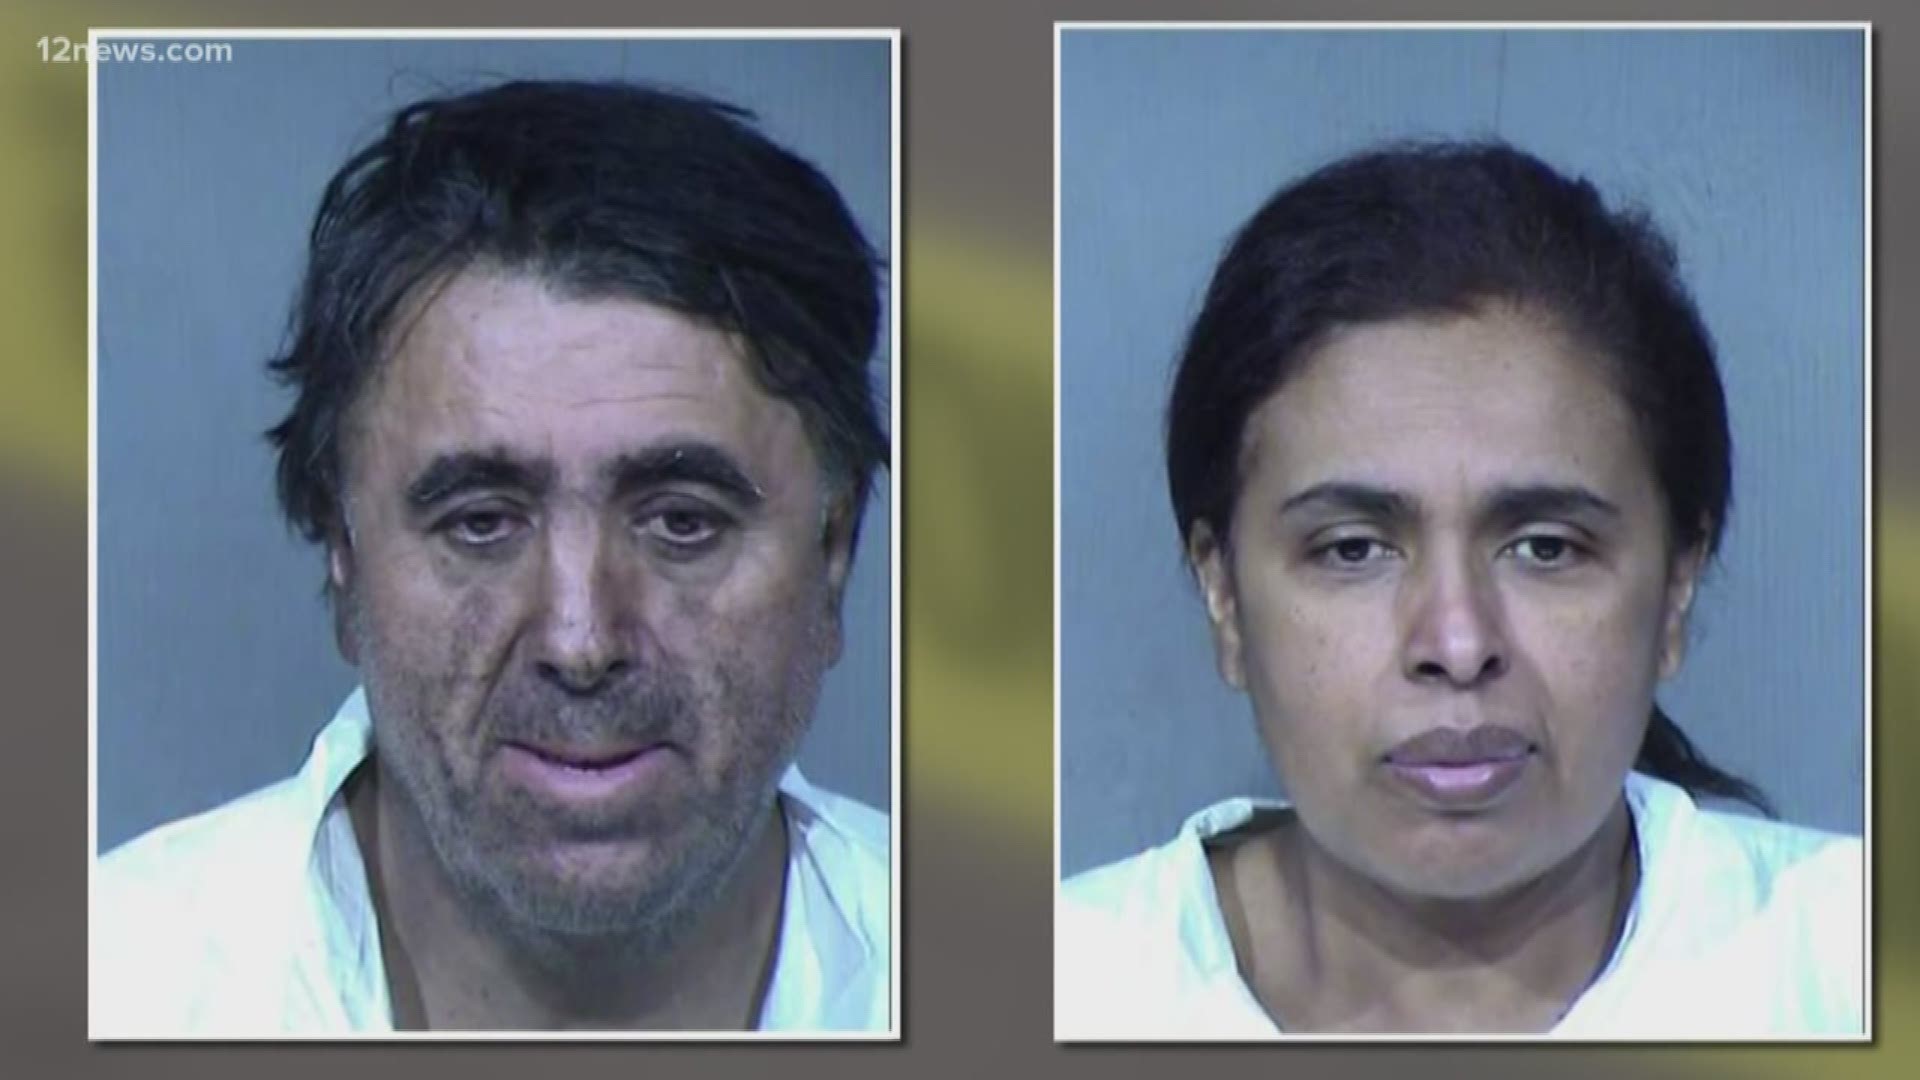 Rafael and Maribel Loera are accused of child abuse and concealing a body after the skeletal remains of a child were found in a house fire in January.